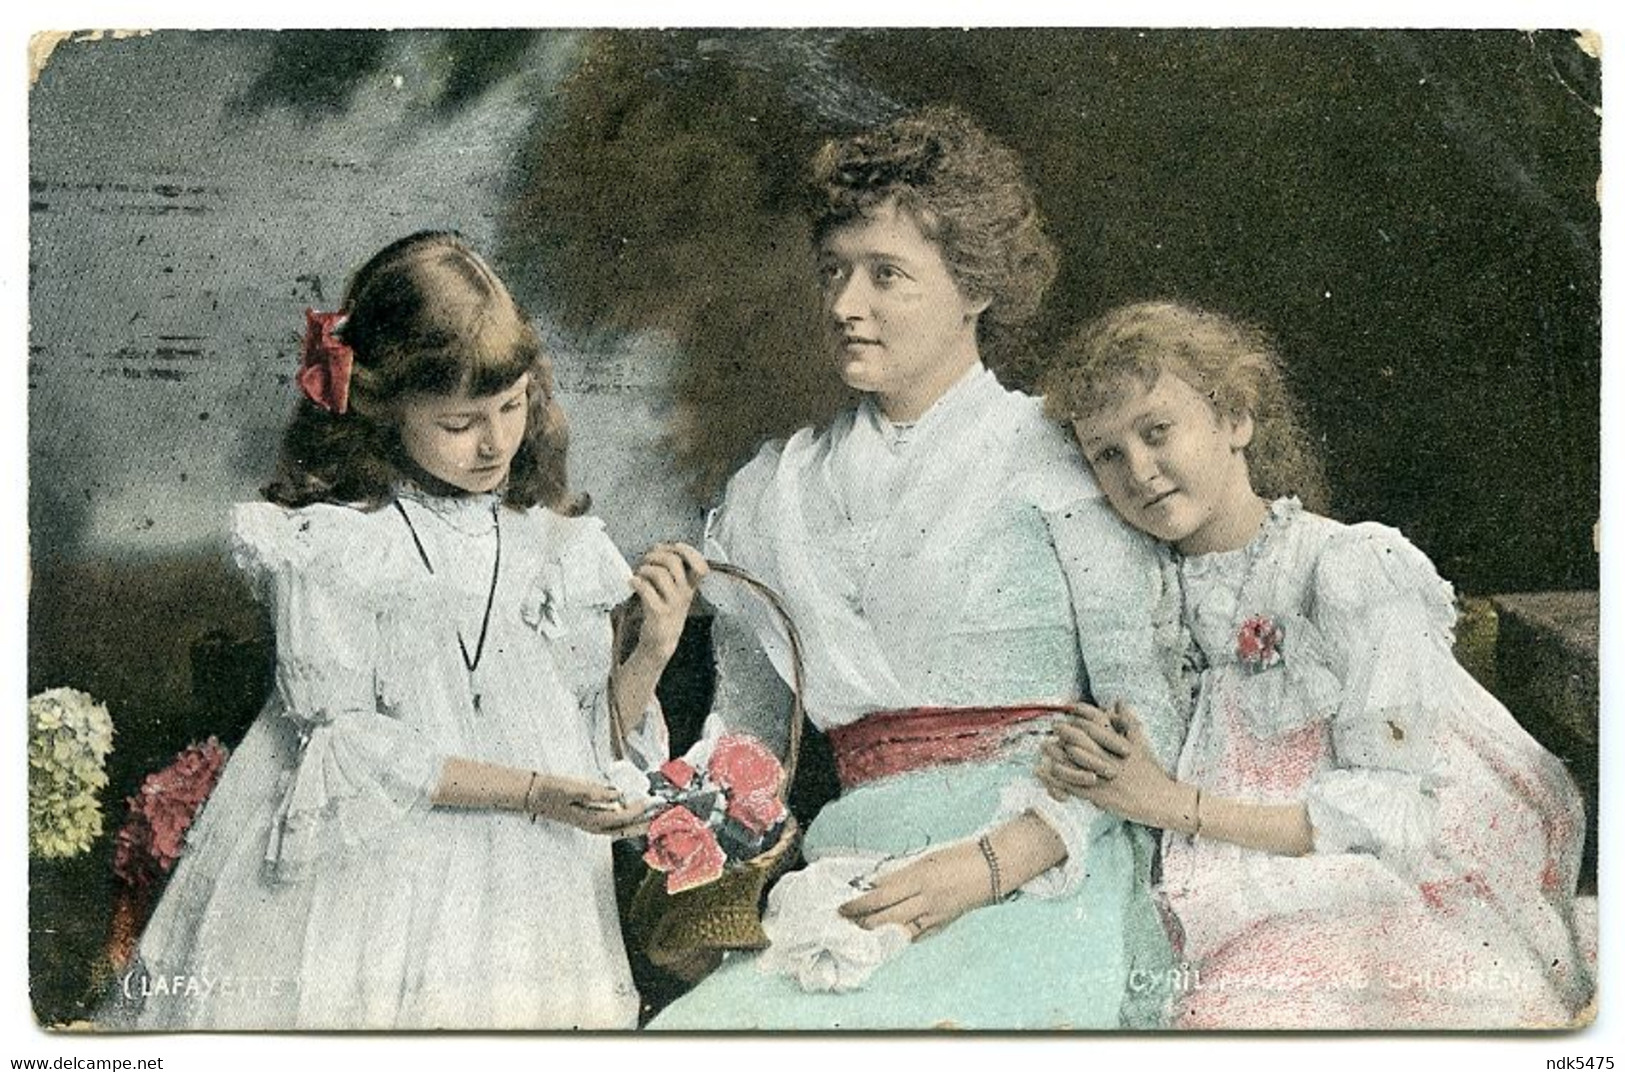 MRS CYRIL MAUDE AND CHILDREN / MOTHER AND DAUGHTERS / ADDRESS - CARDIFF, RICHMOND TERRACE, (ABRAHAMSON) - Theater